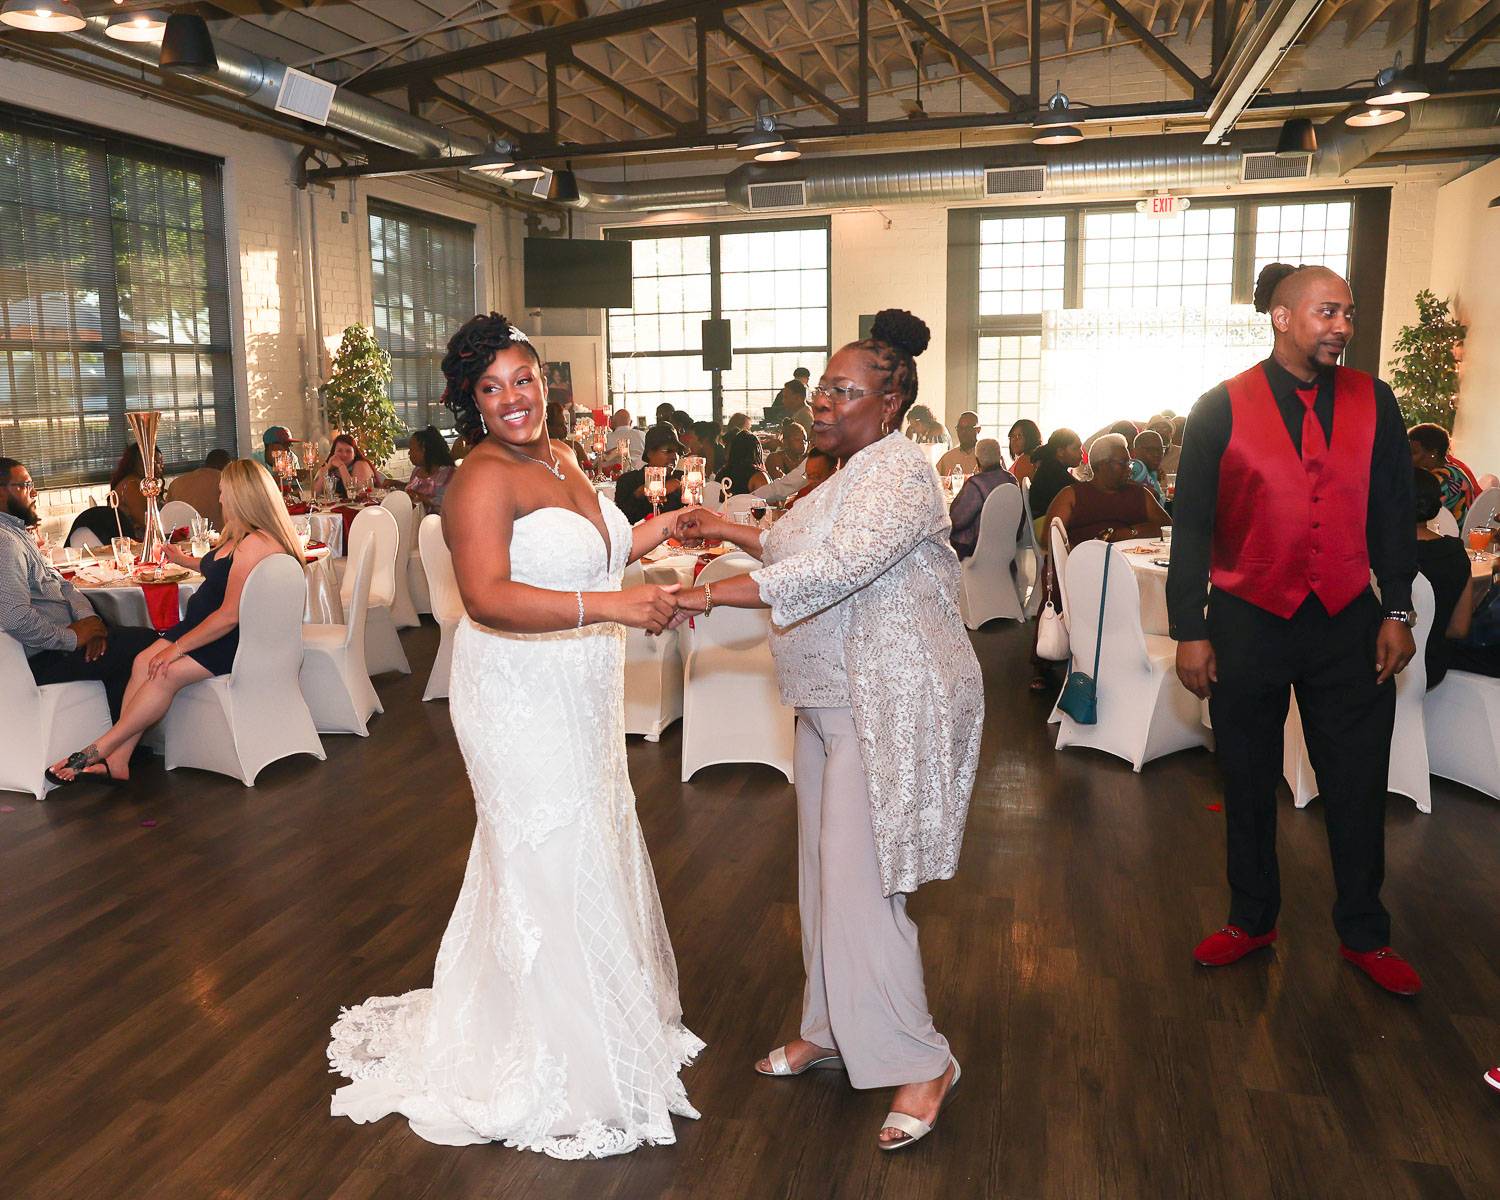 The bride and the mother-in-law dancing in the hall